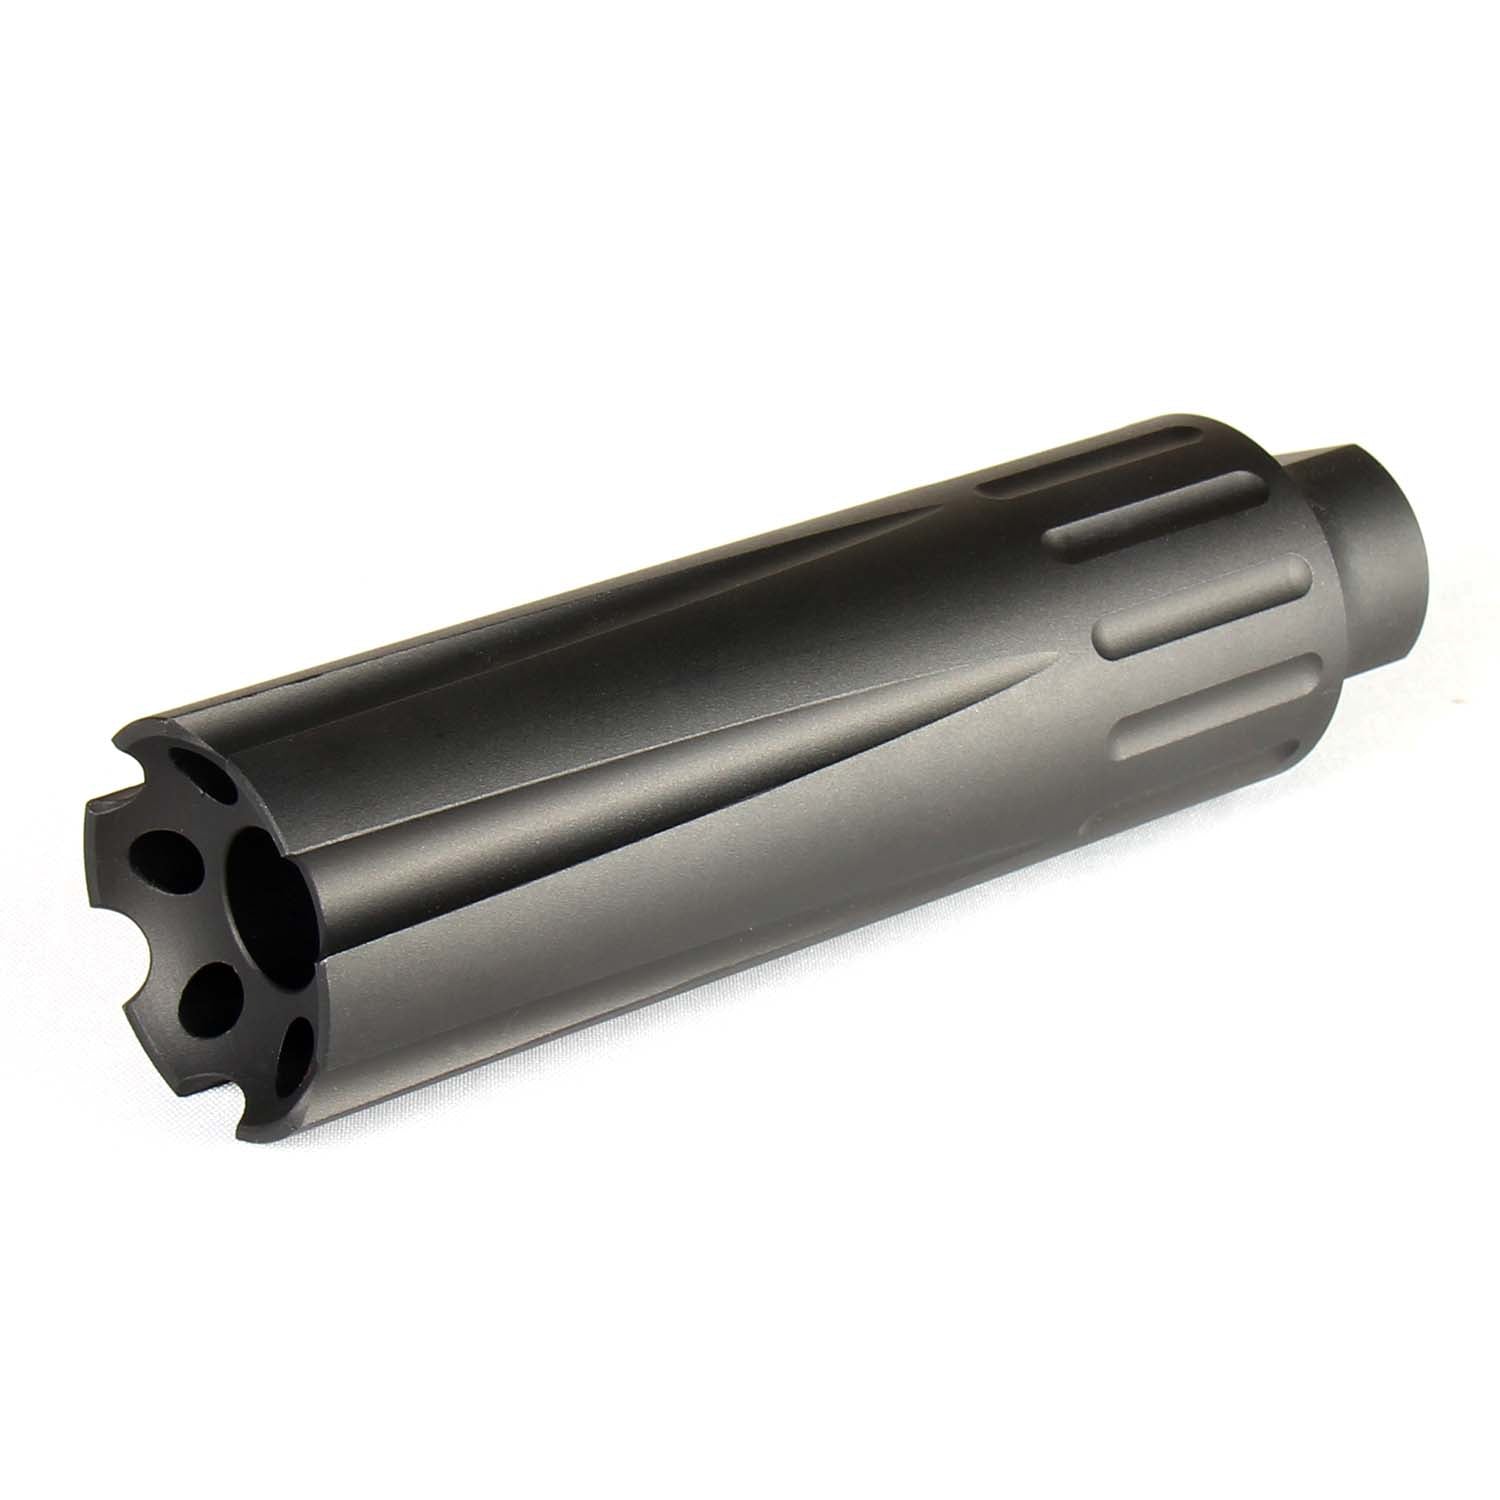 4.5 Extra Long Low Concussion Linear Compensator Muzzle Brake for